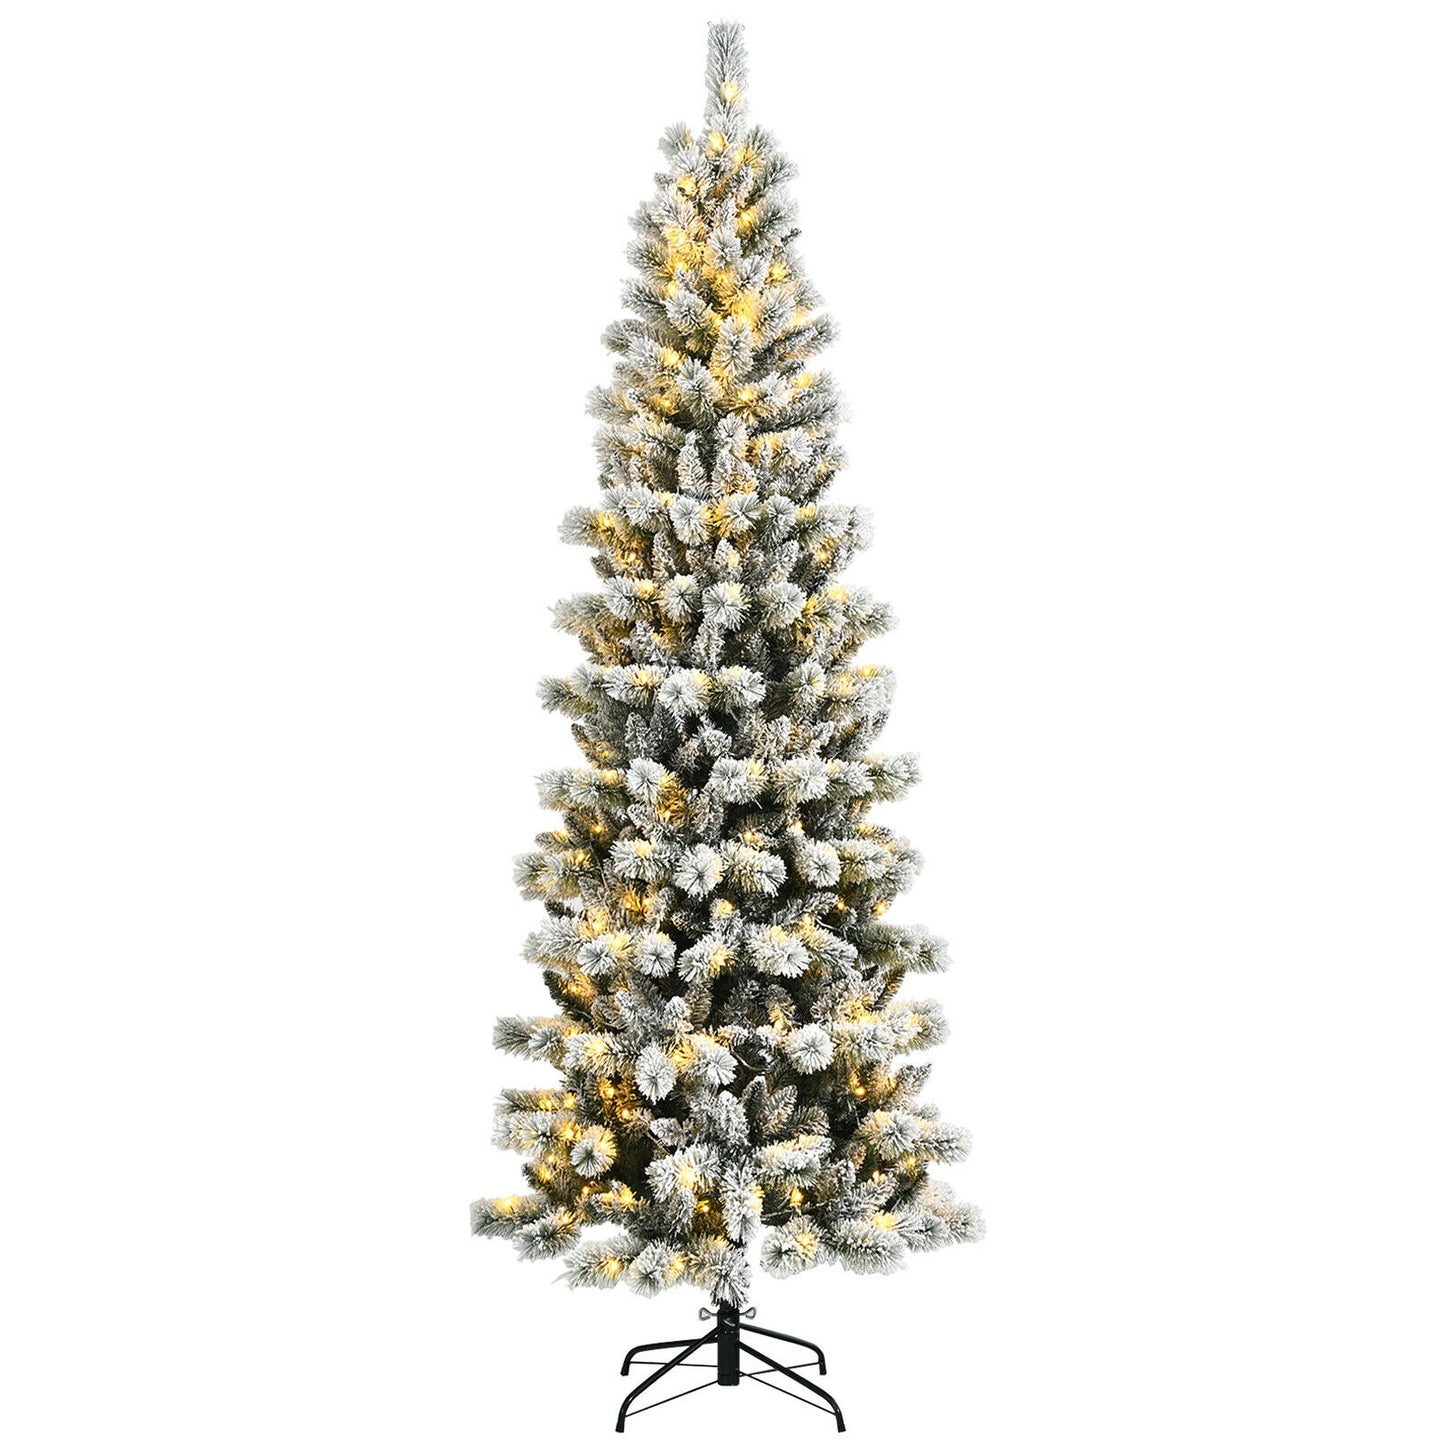 8 Feet Pre-Lit Hinged Snow Flocked Christmas Tree with Remote Control